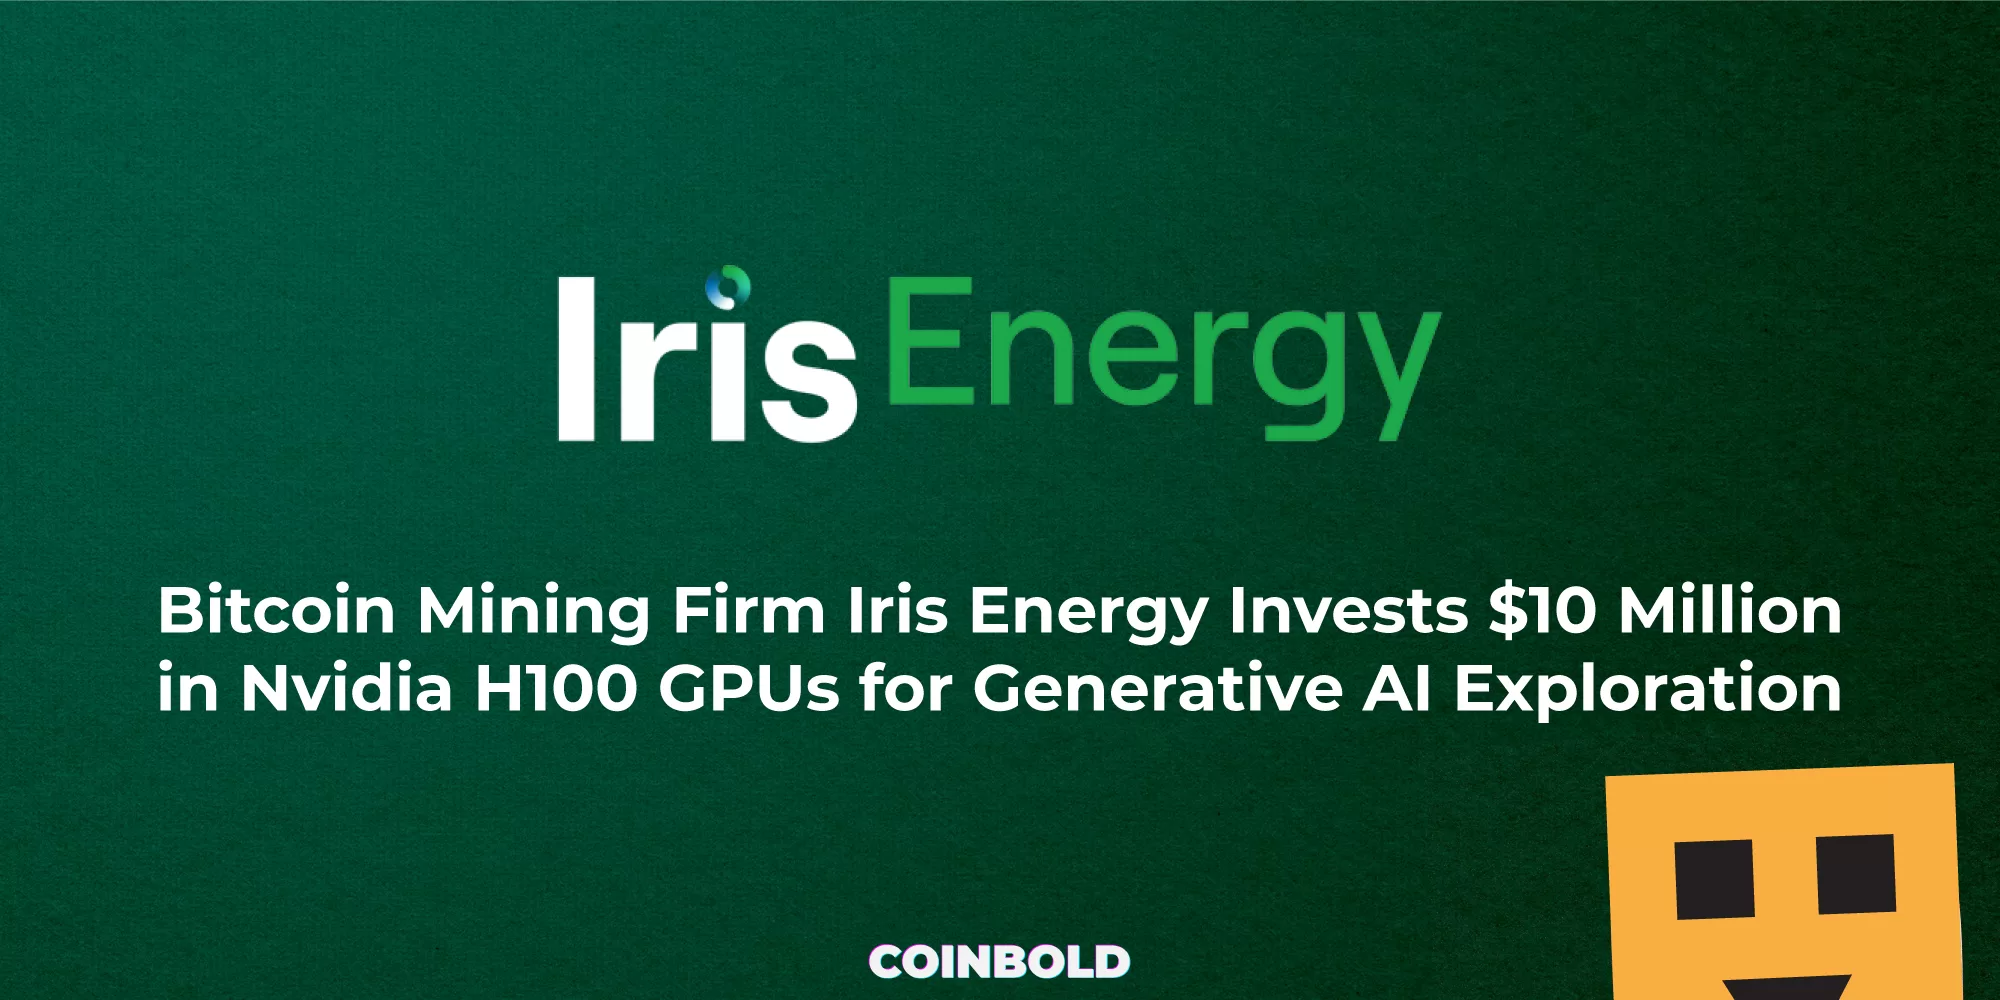 Bitcoin Mining Firm Iris Energy Invests $10 Million in Nvidia H100 GPUs for Generative AI Exploration